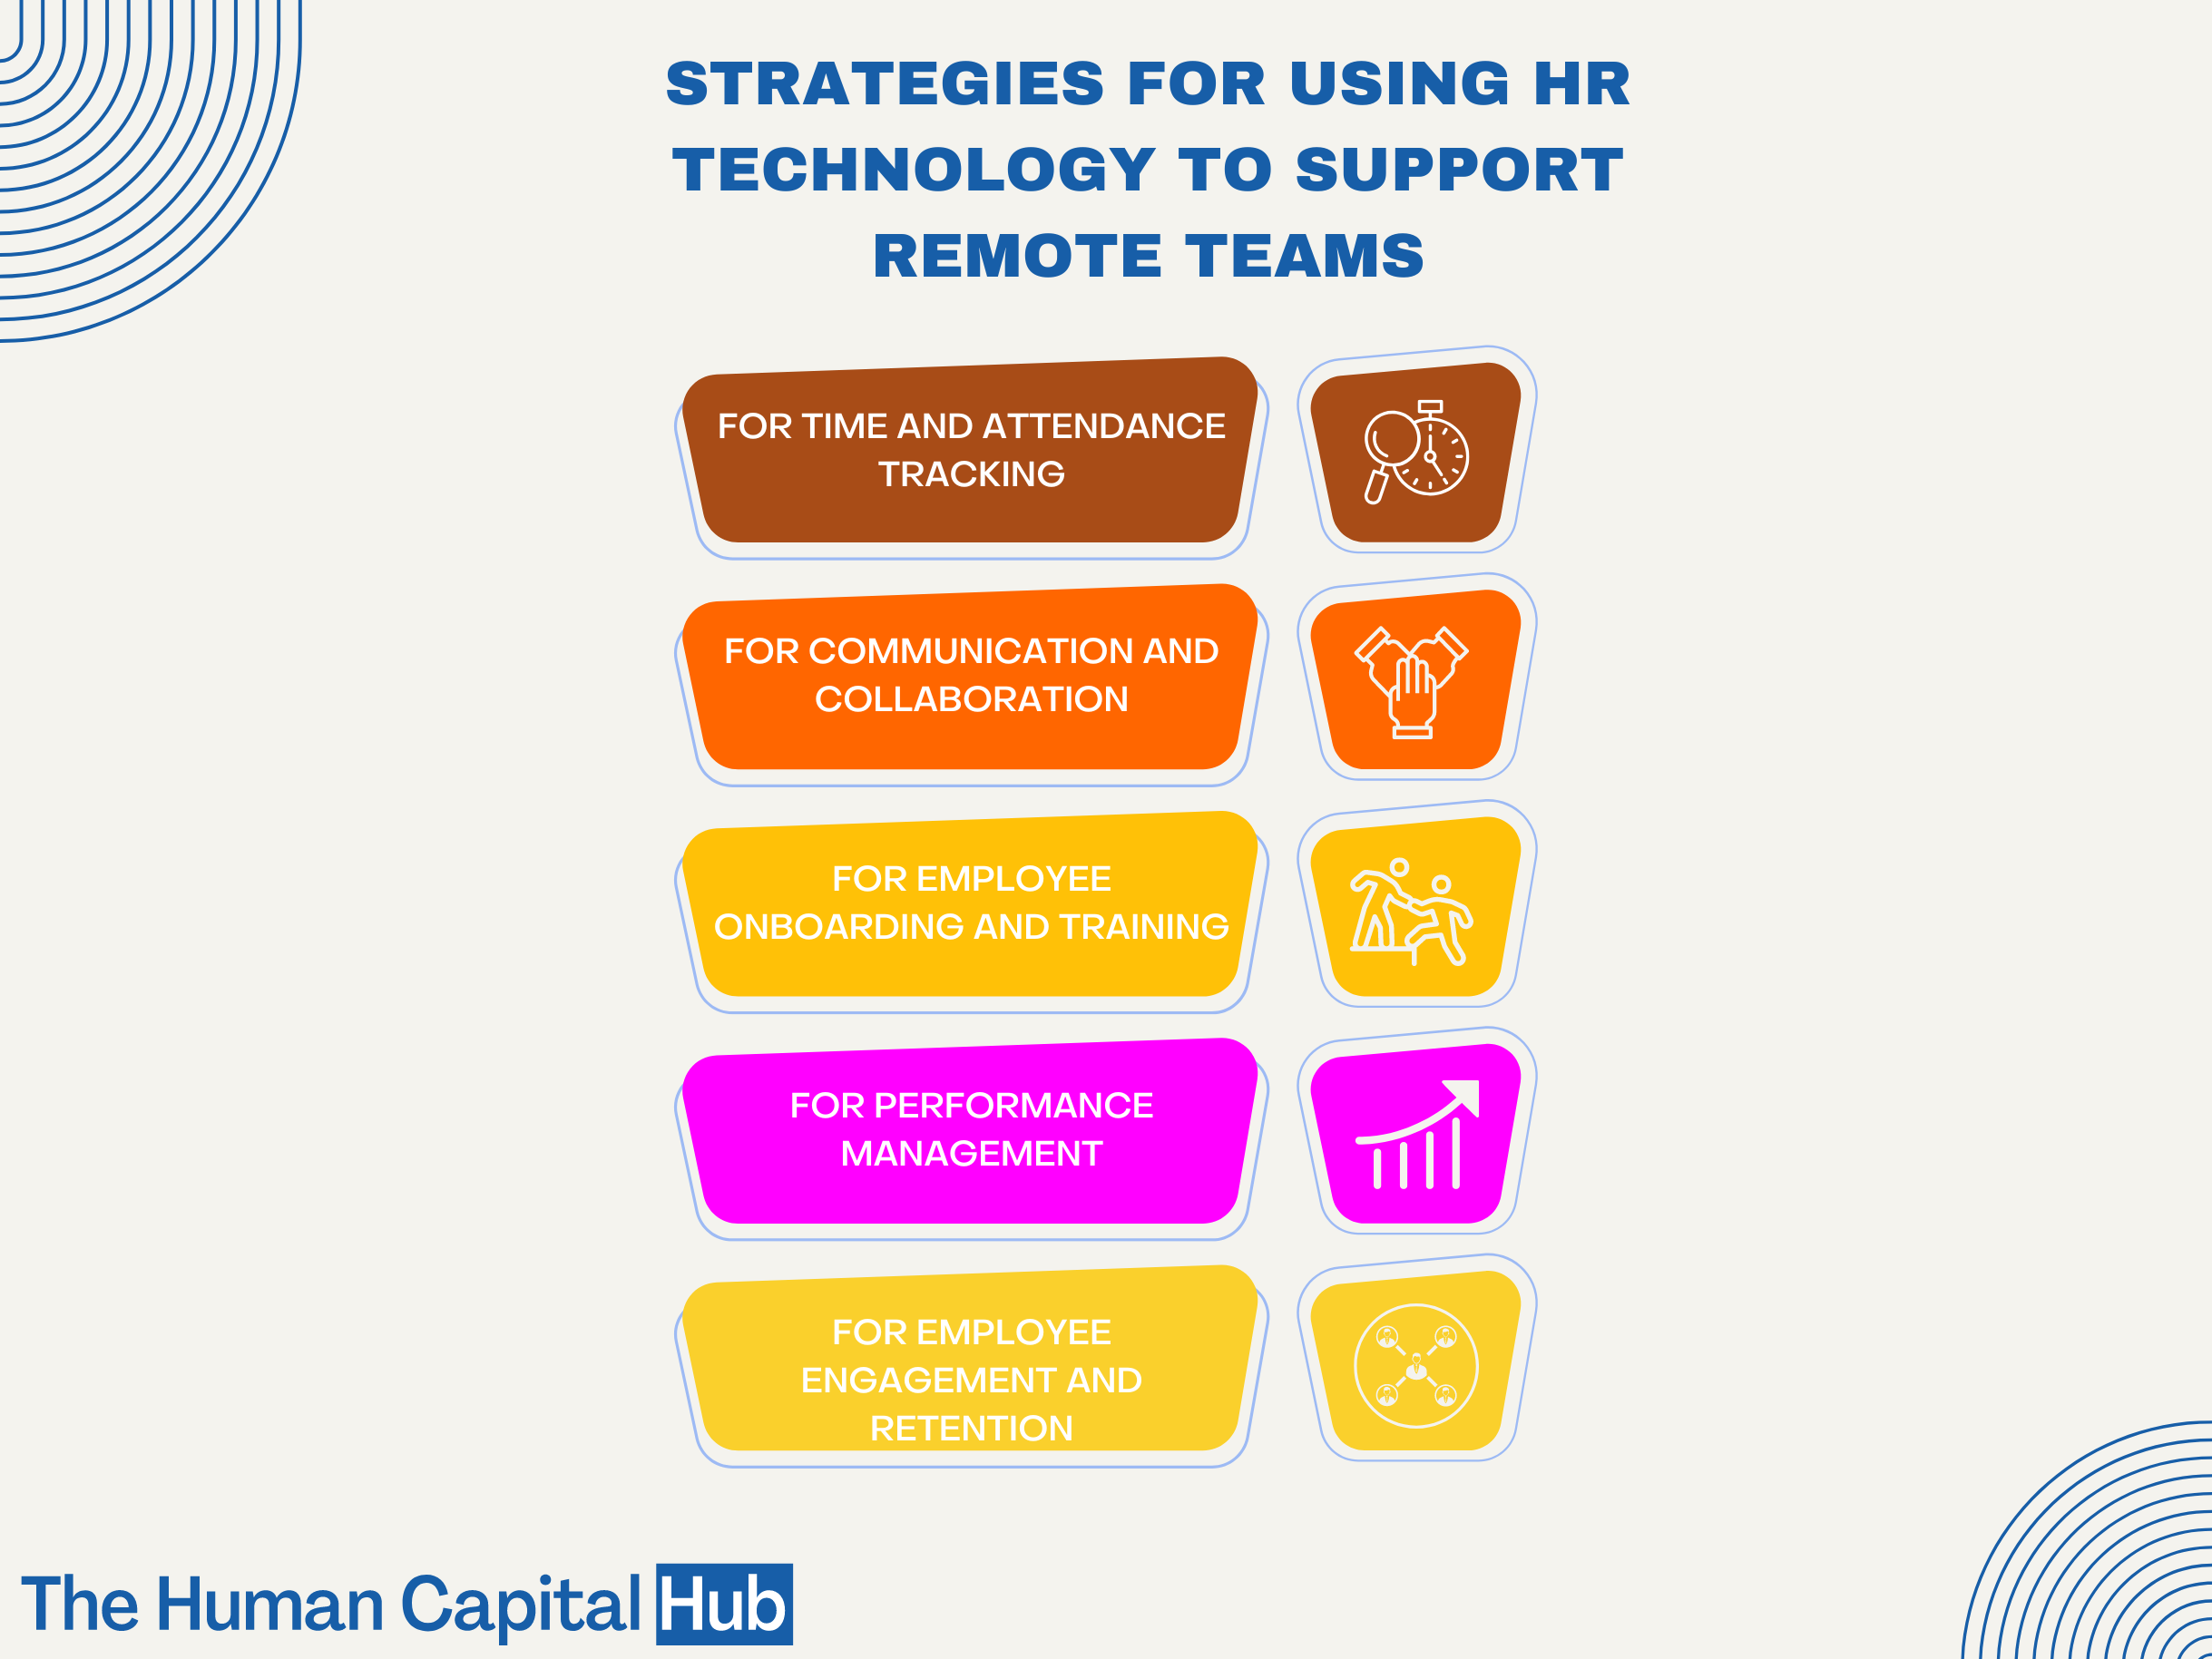 Strategies for using HR Technology to support remote teams